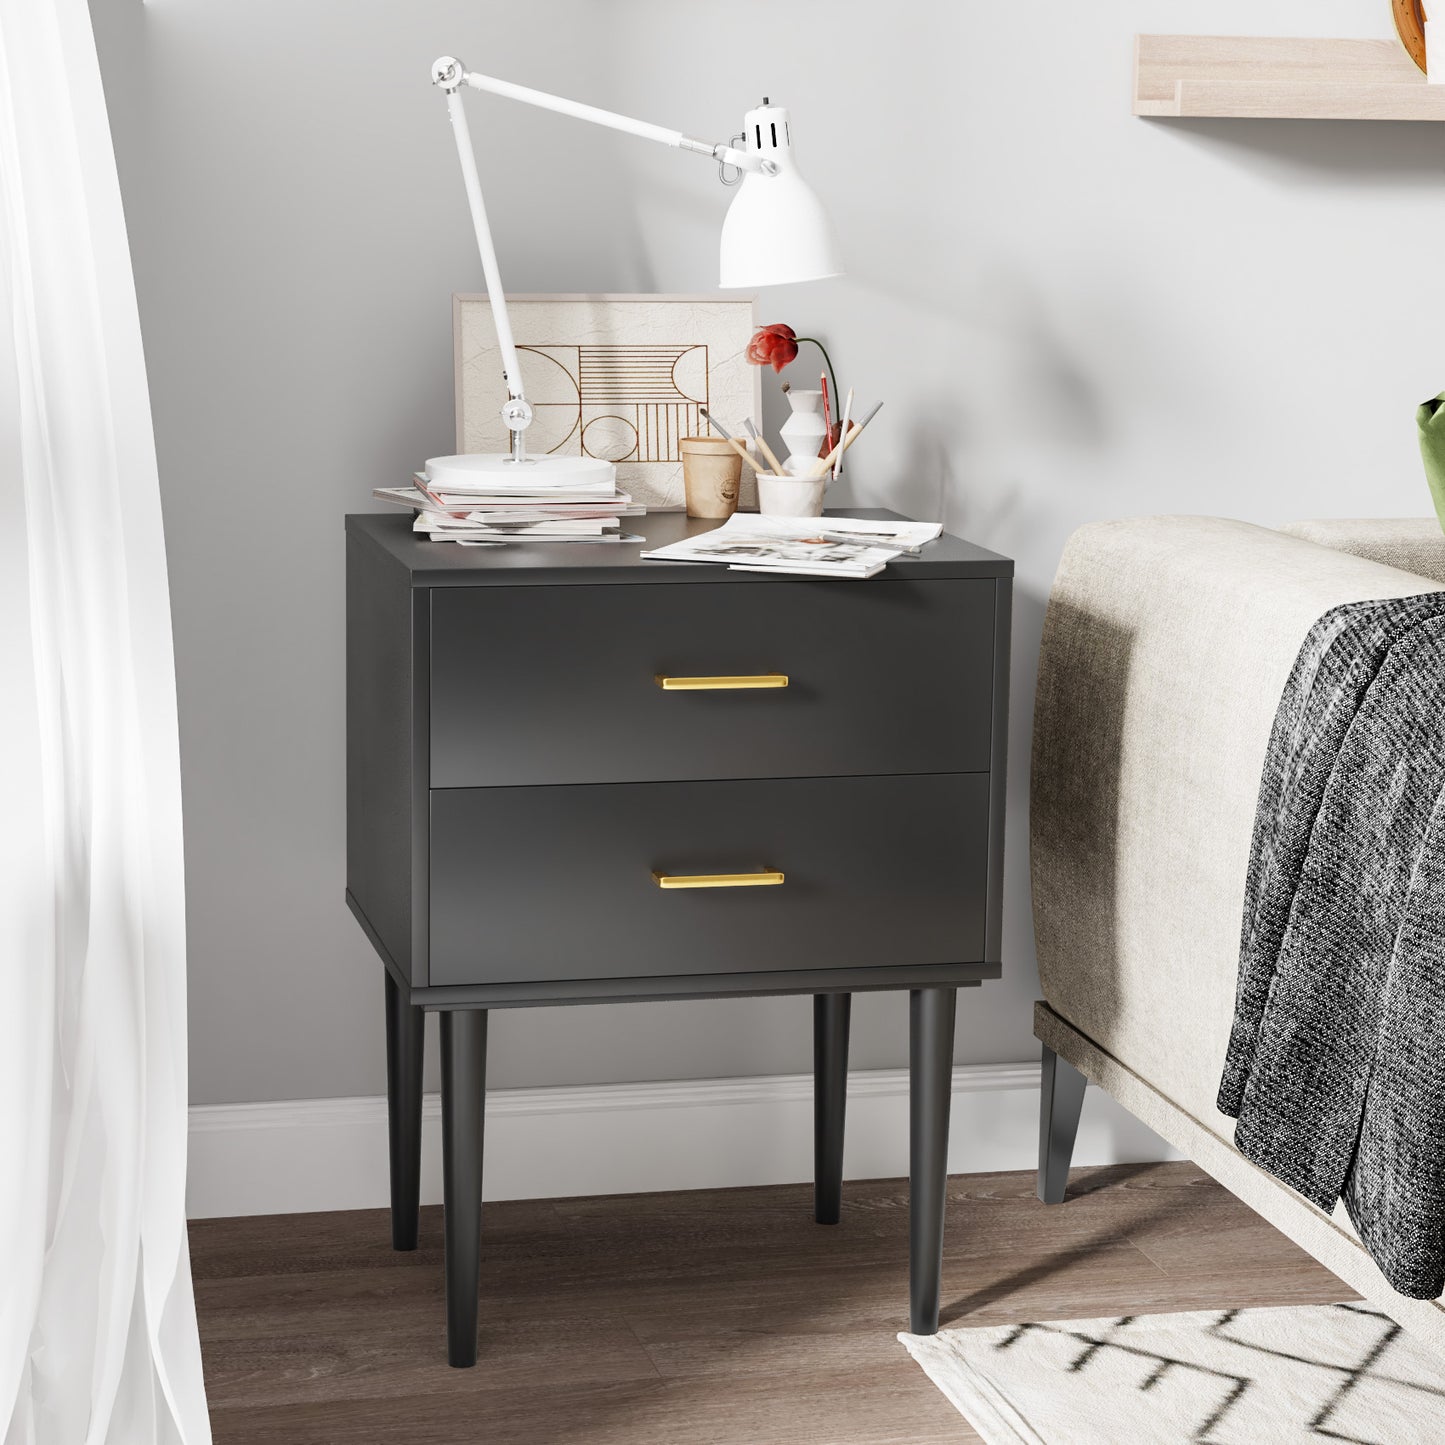 Algherohein Classic Morden Nightstand with 2 Drawers for Bedroom